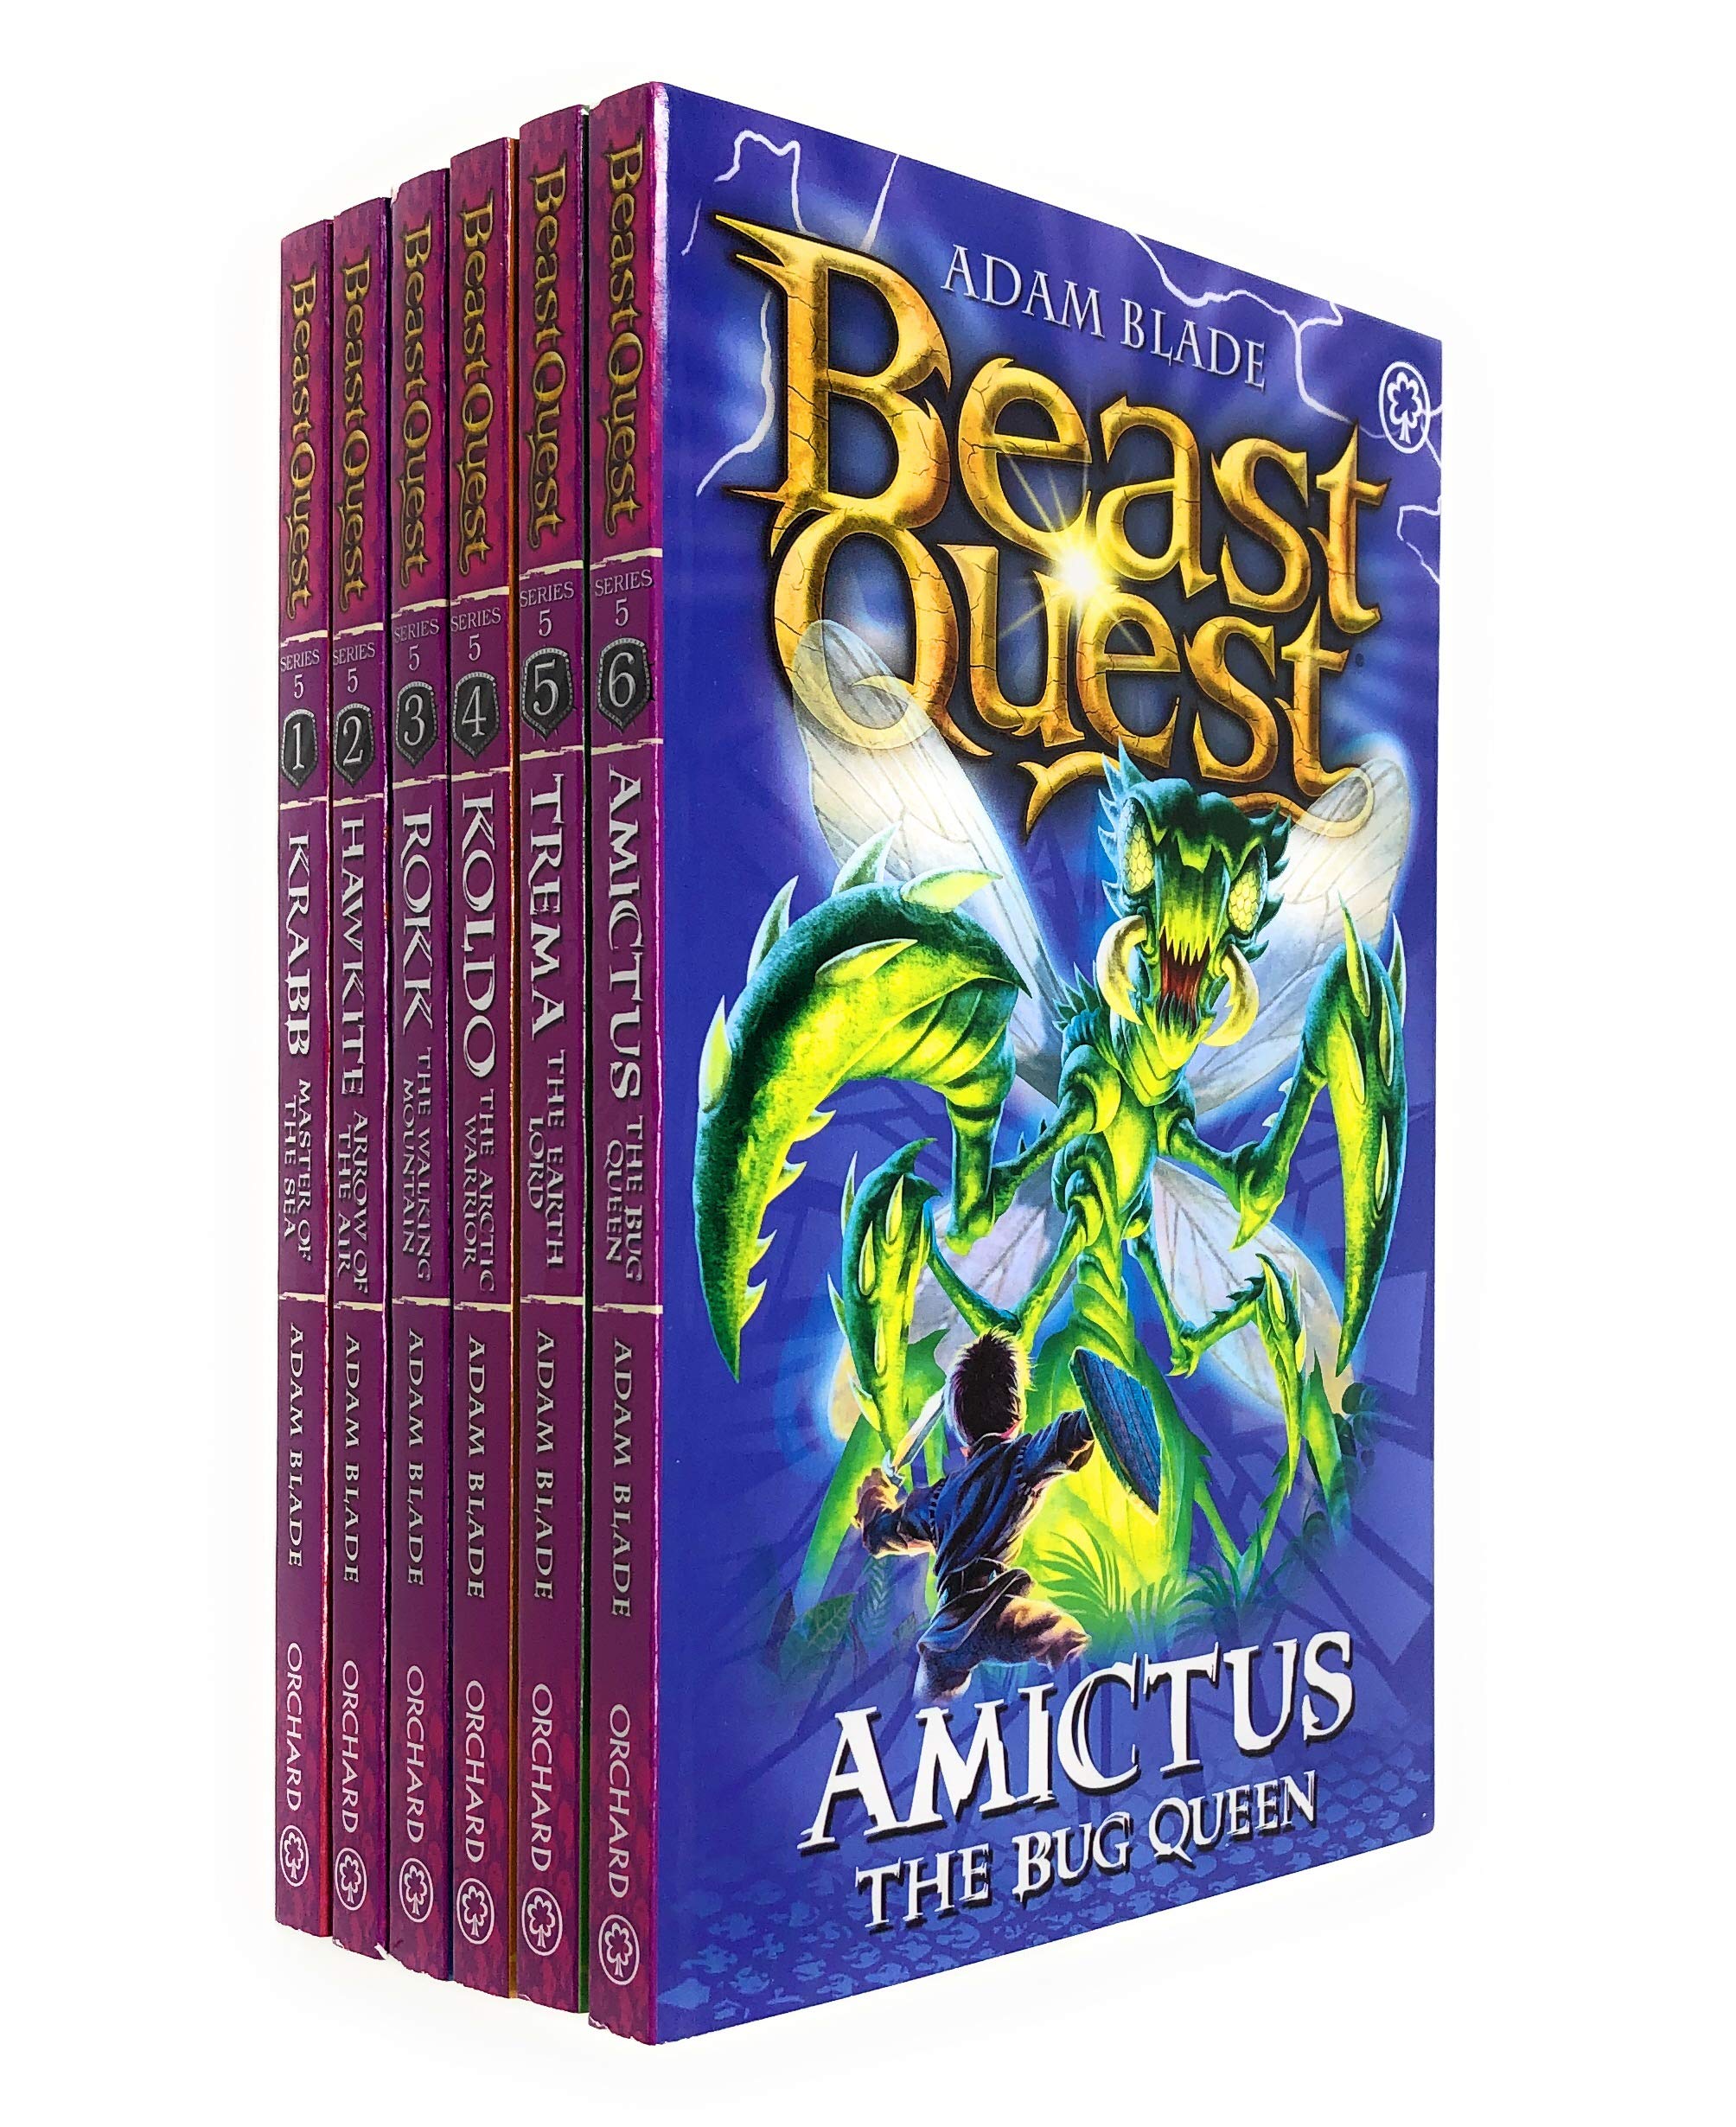 Beast Quest Series 5 Collection 6 Books Set by Adam Blade, Walking Mountain Paperback - Lets Buy Books